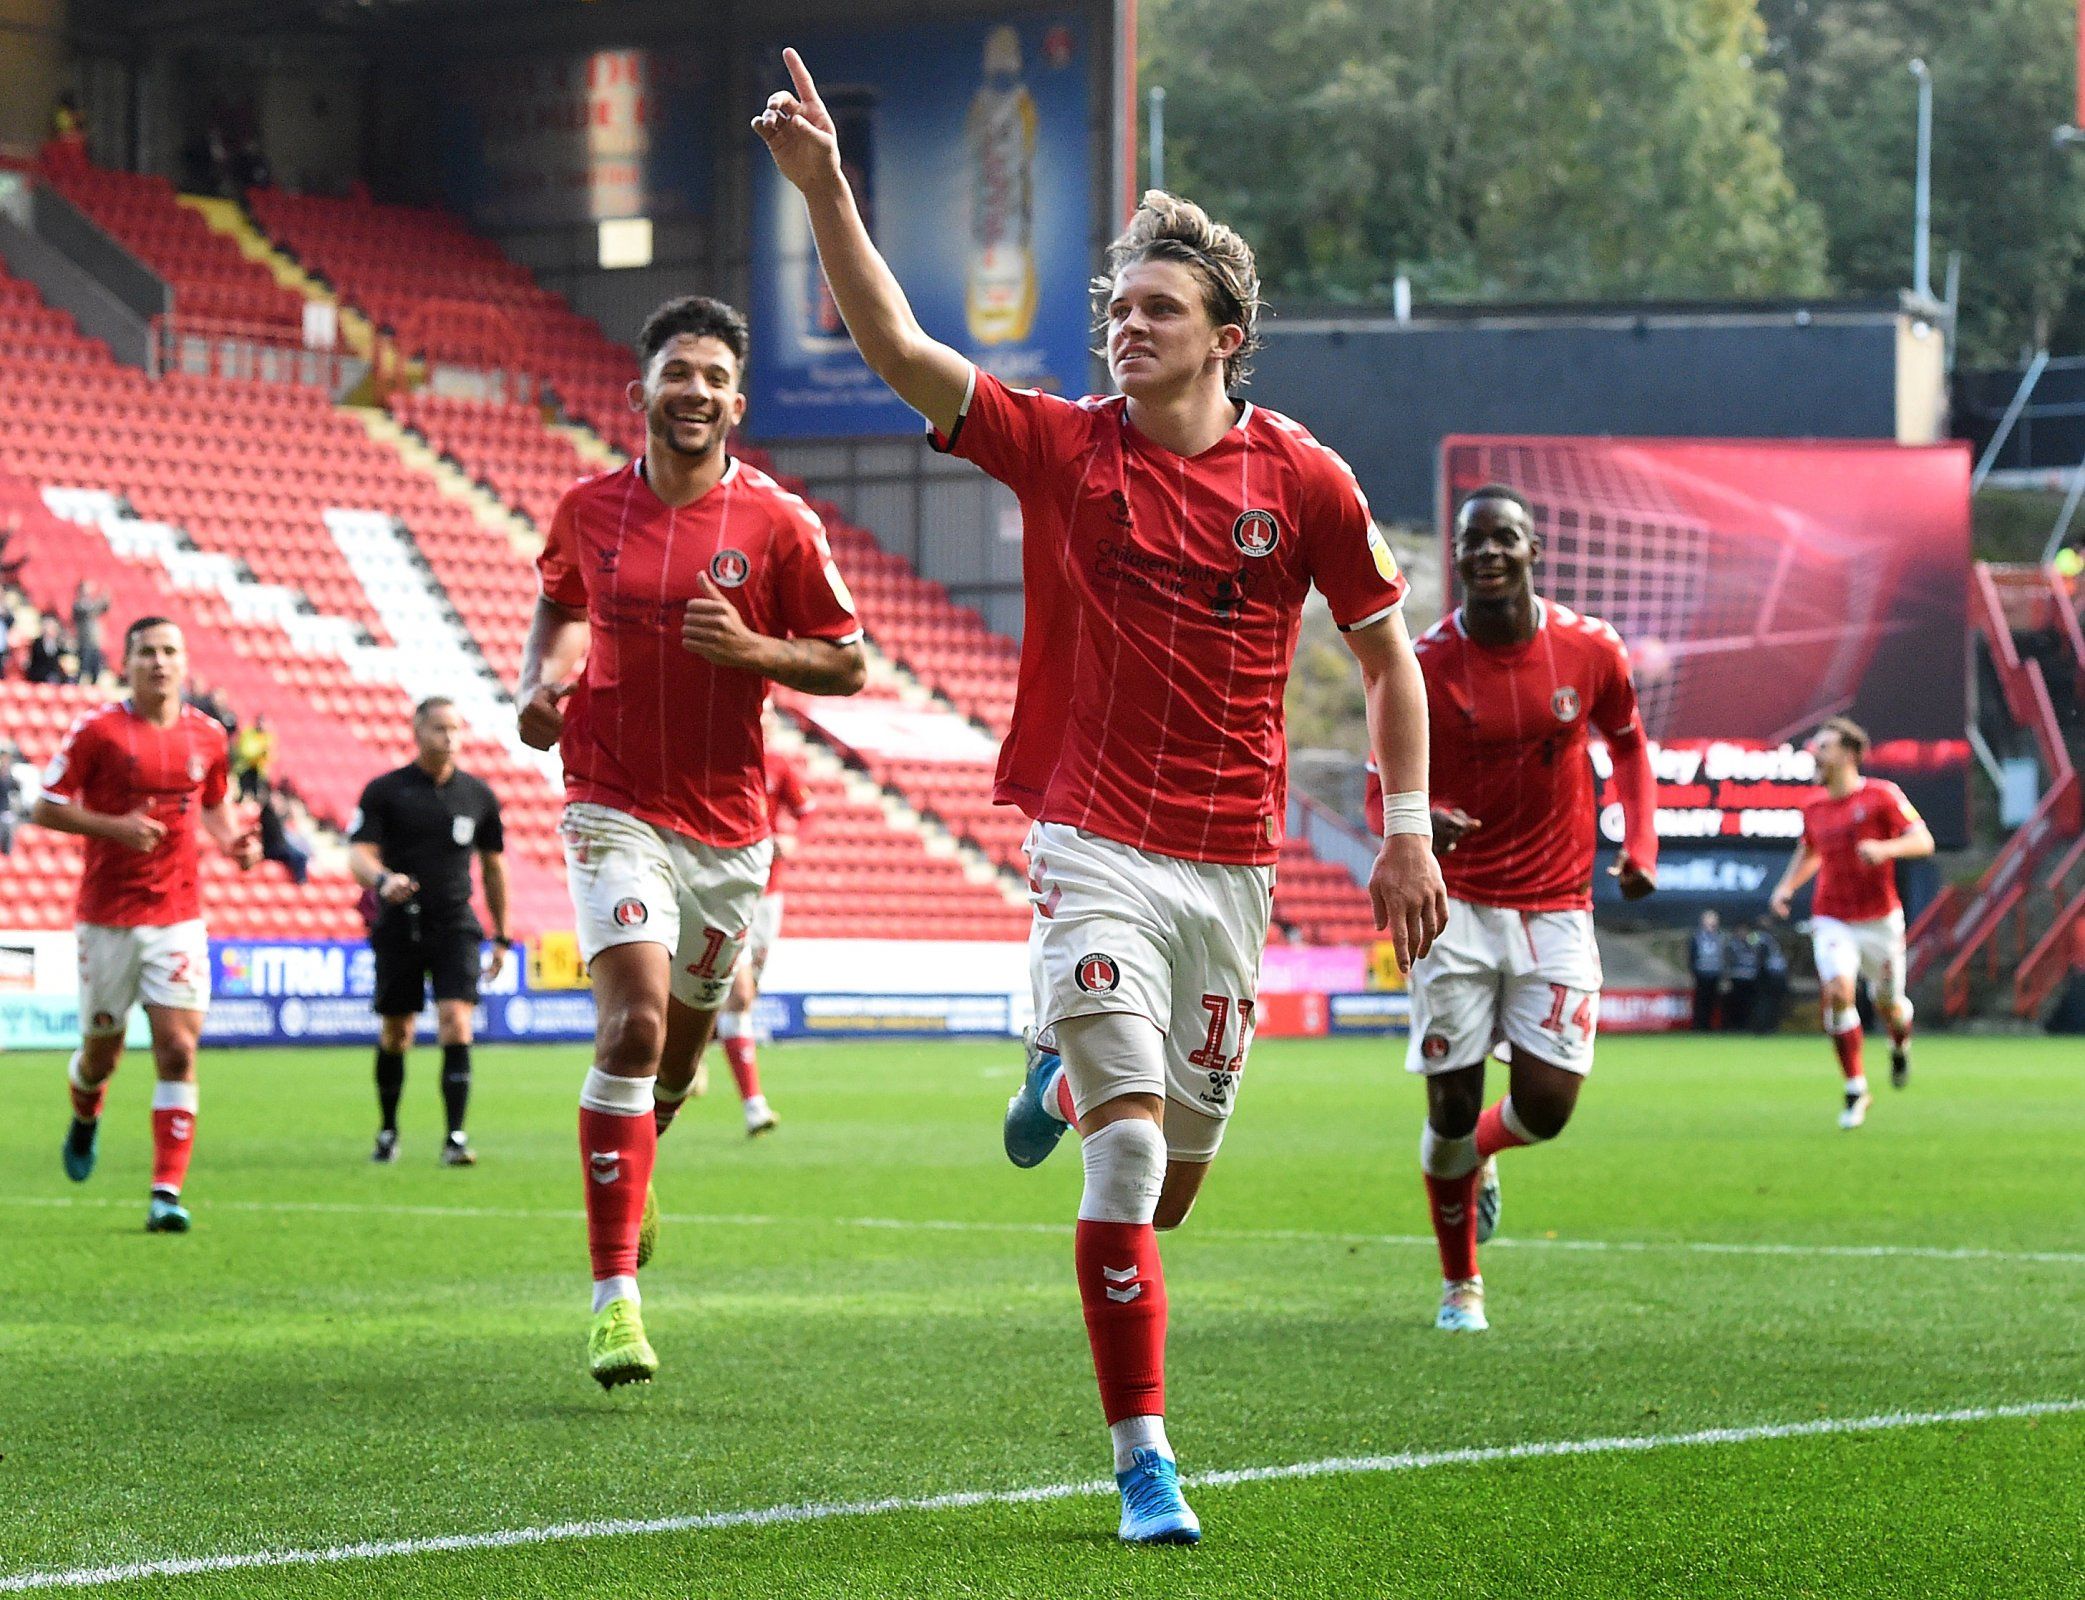 chelsea-loanee-conor-gallagher-scores-for-charlton-athletic-vs-derby-county-the-valley-championship